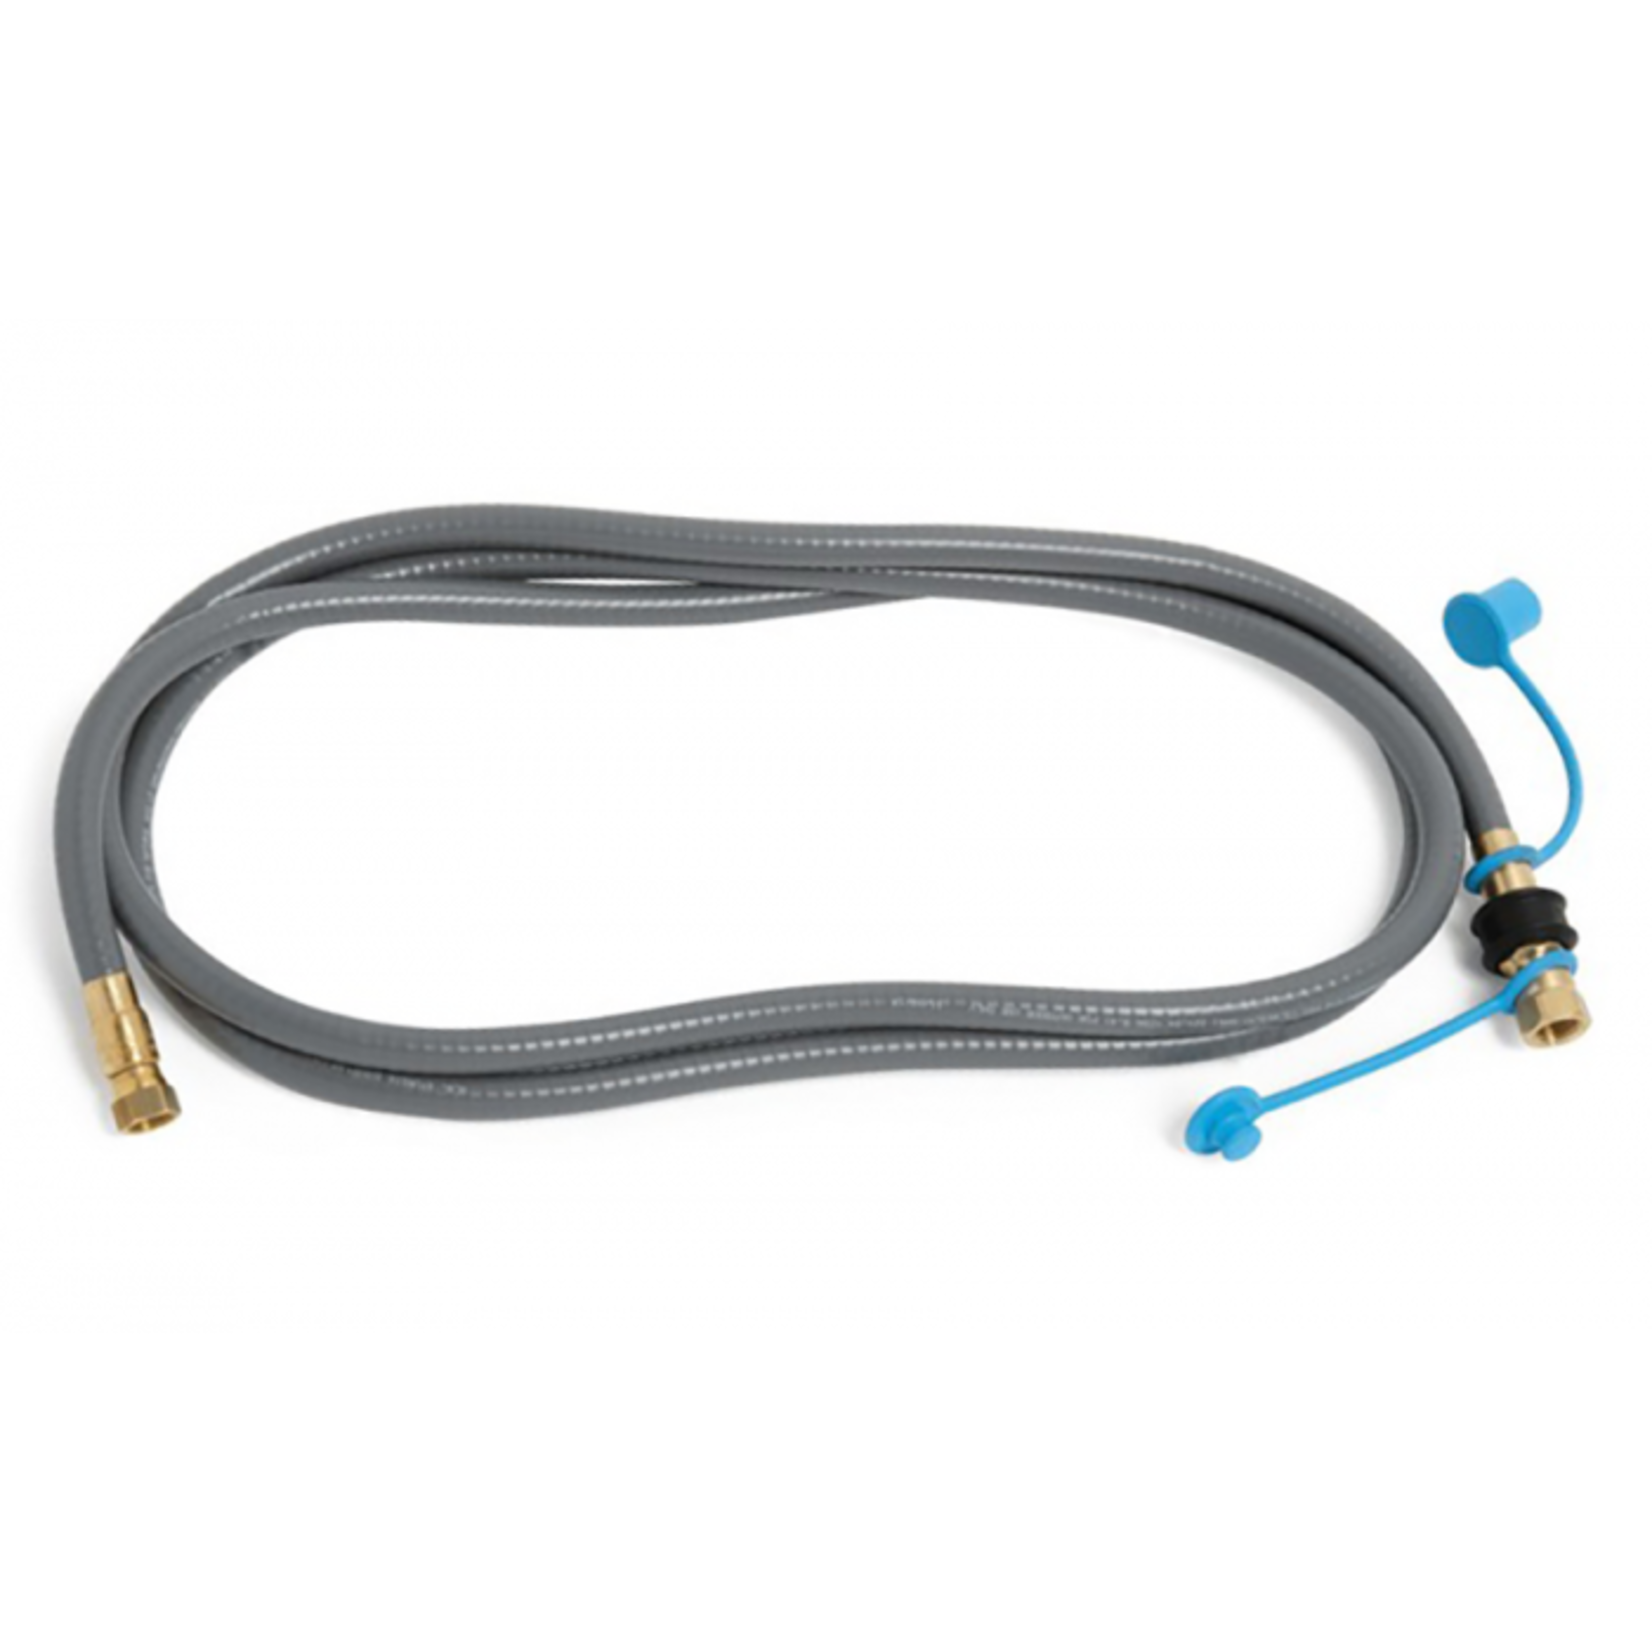 Napoleon 10' Natural Gas hose with 3/8" Quick Connect